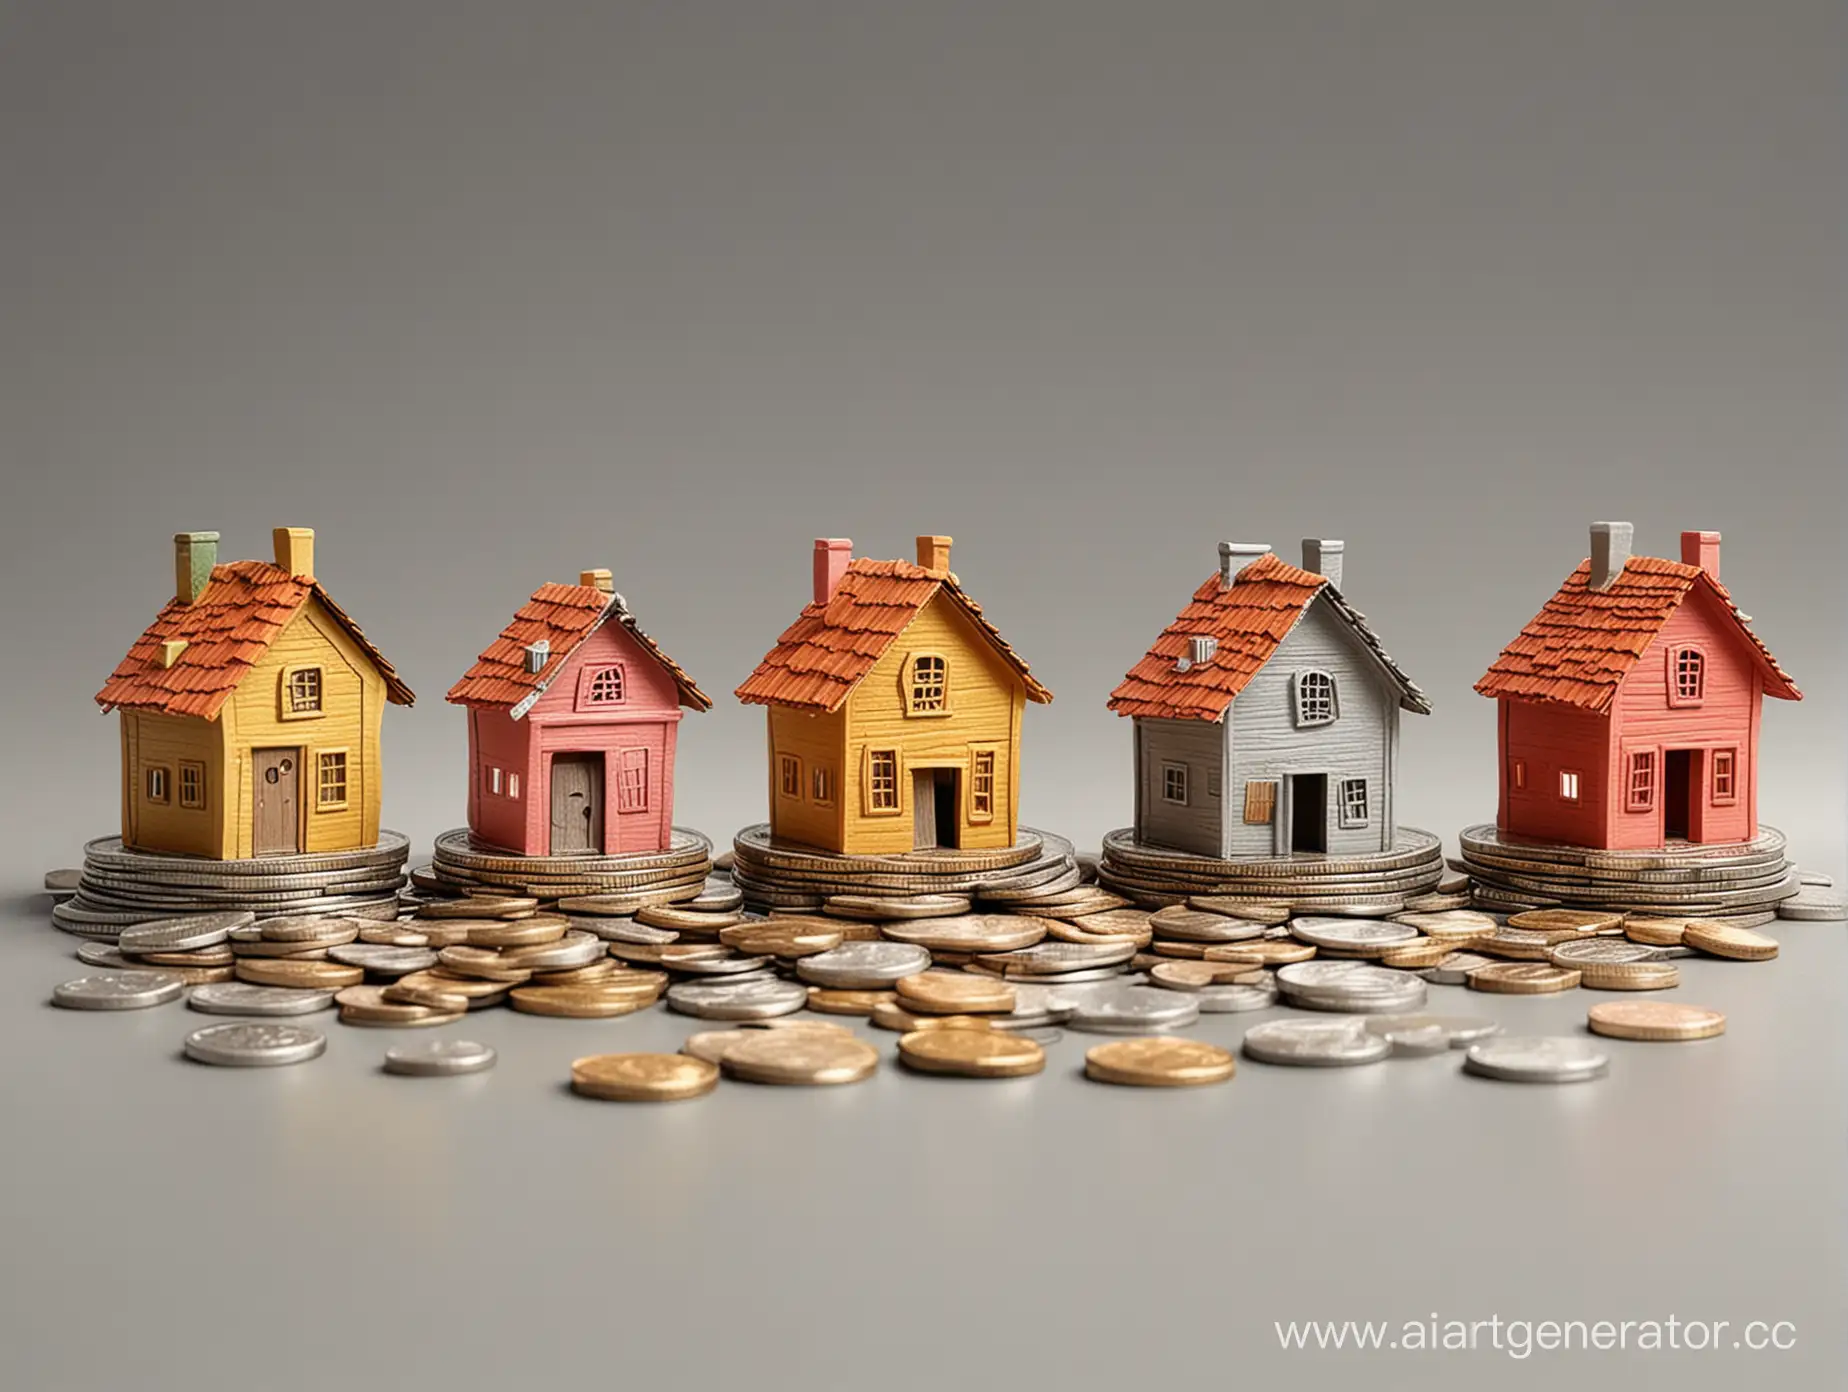 Miniature-Shops-on-3D-Coins-with-Falling-Roofs